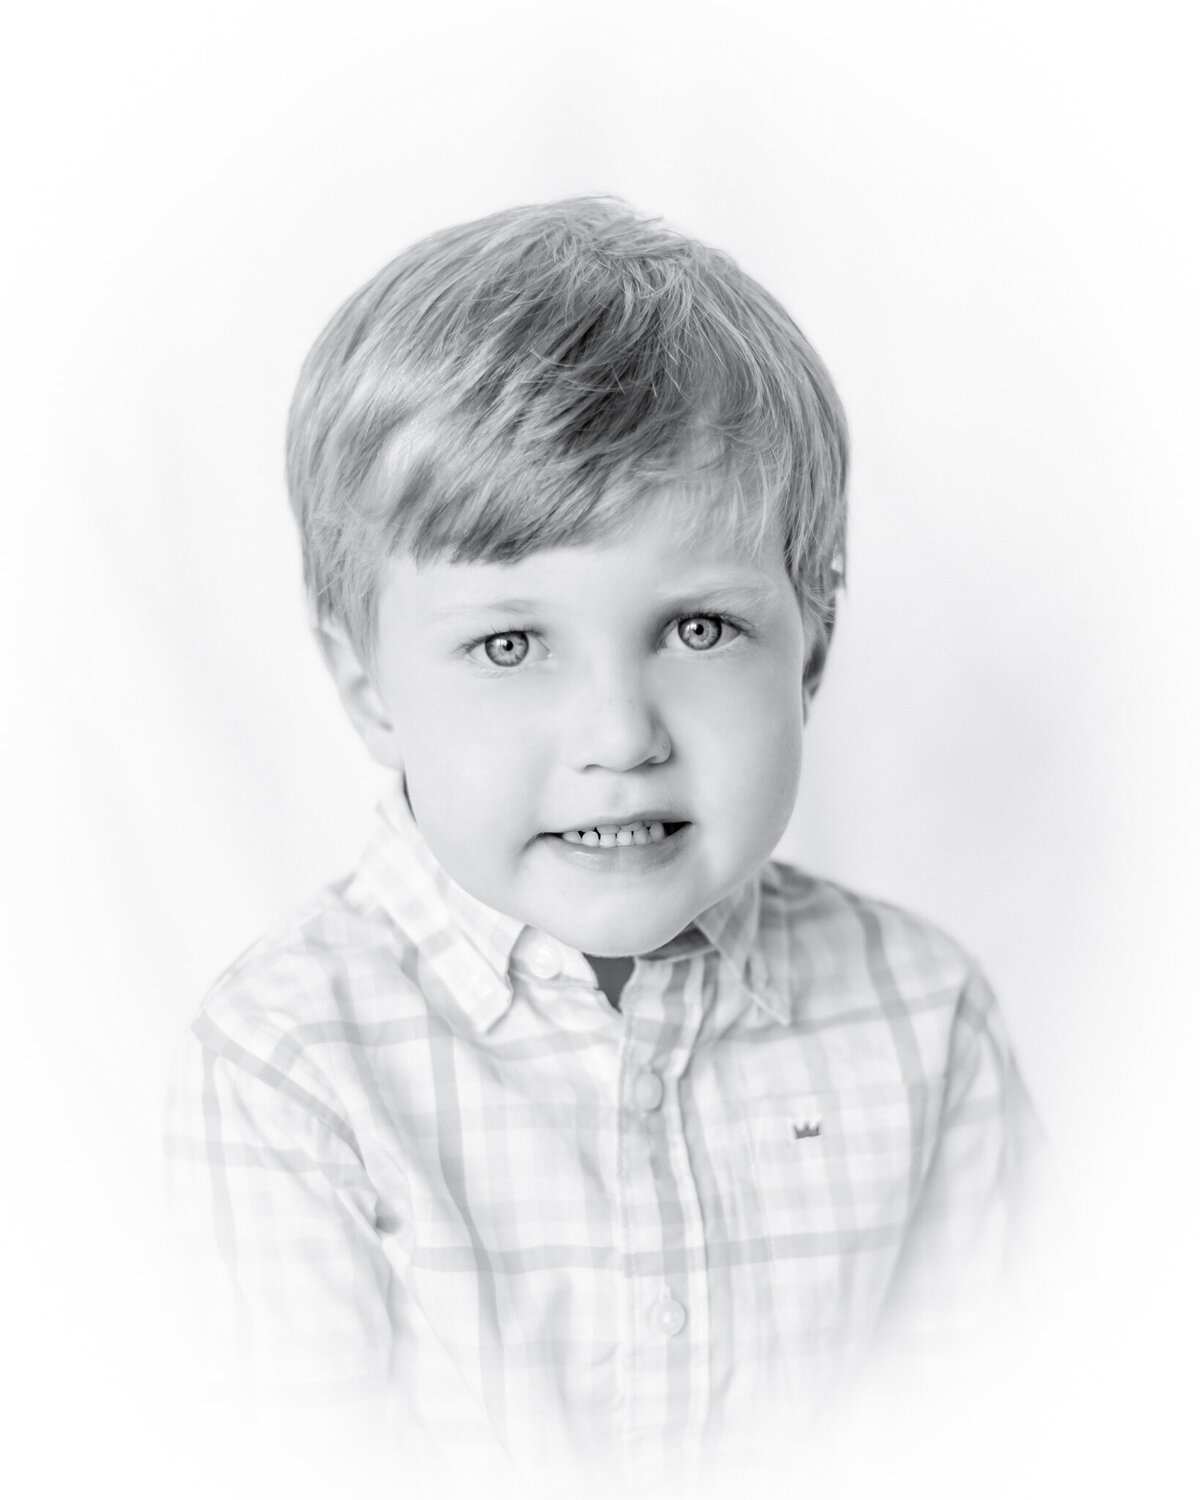 Black and white vignetted portrait of a little boy